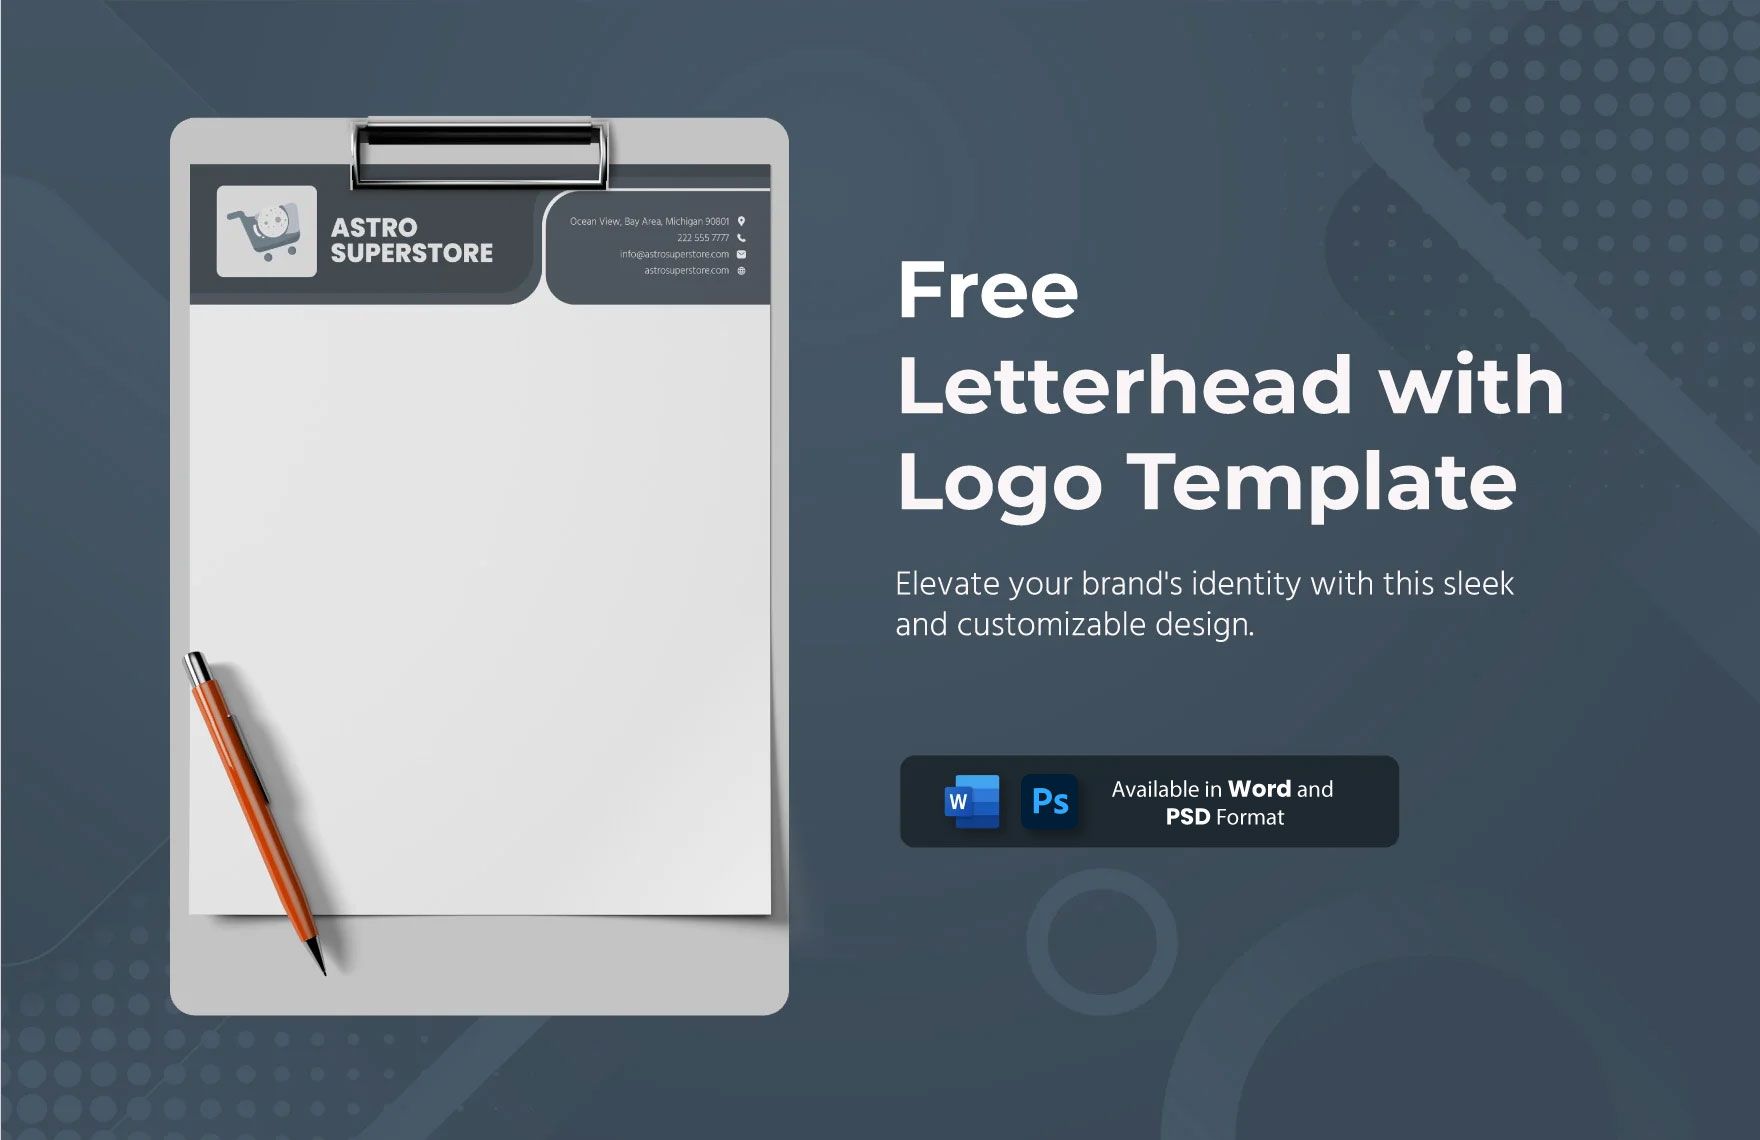 Free Letterhead with Logo Template